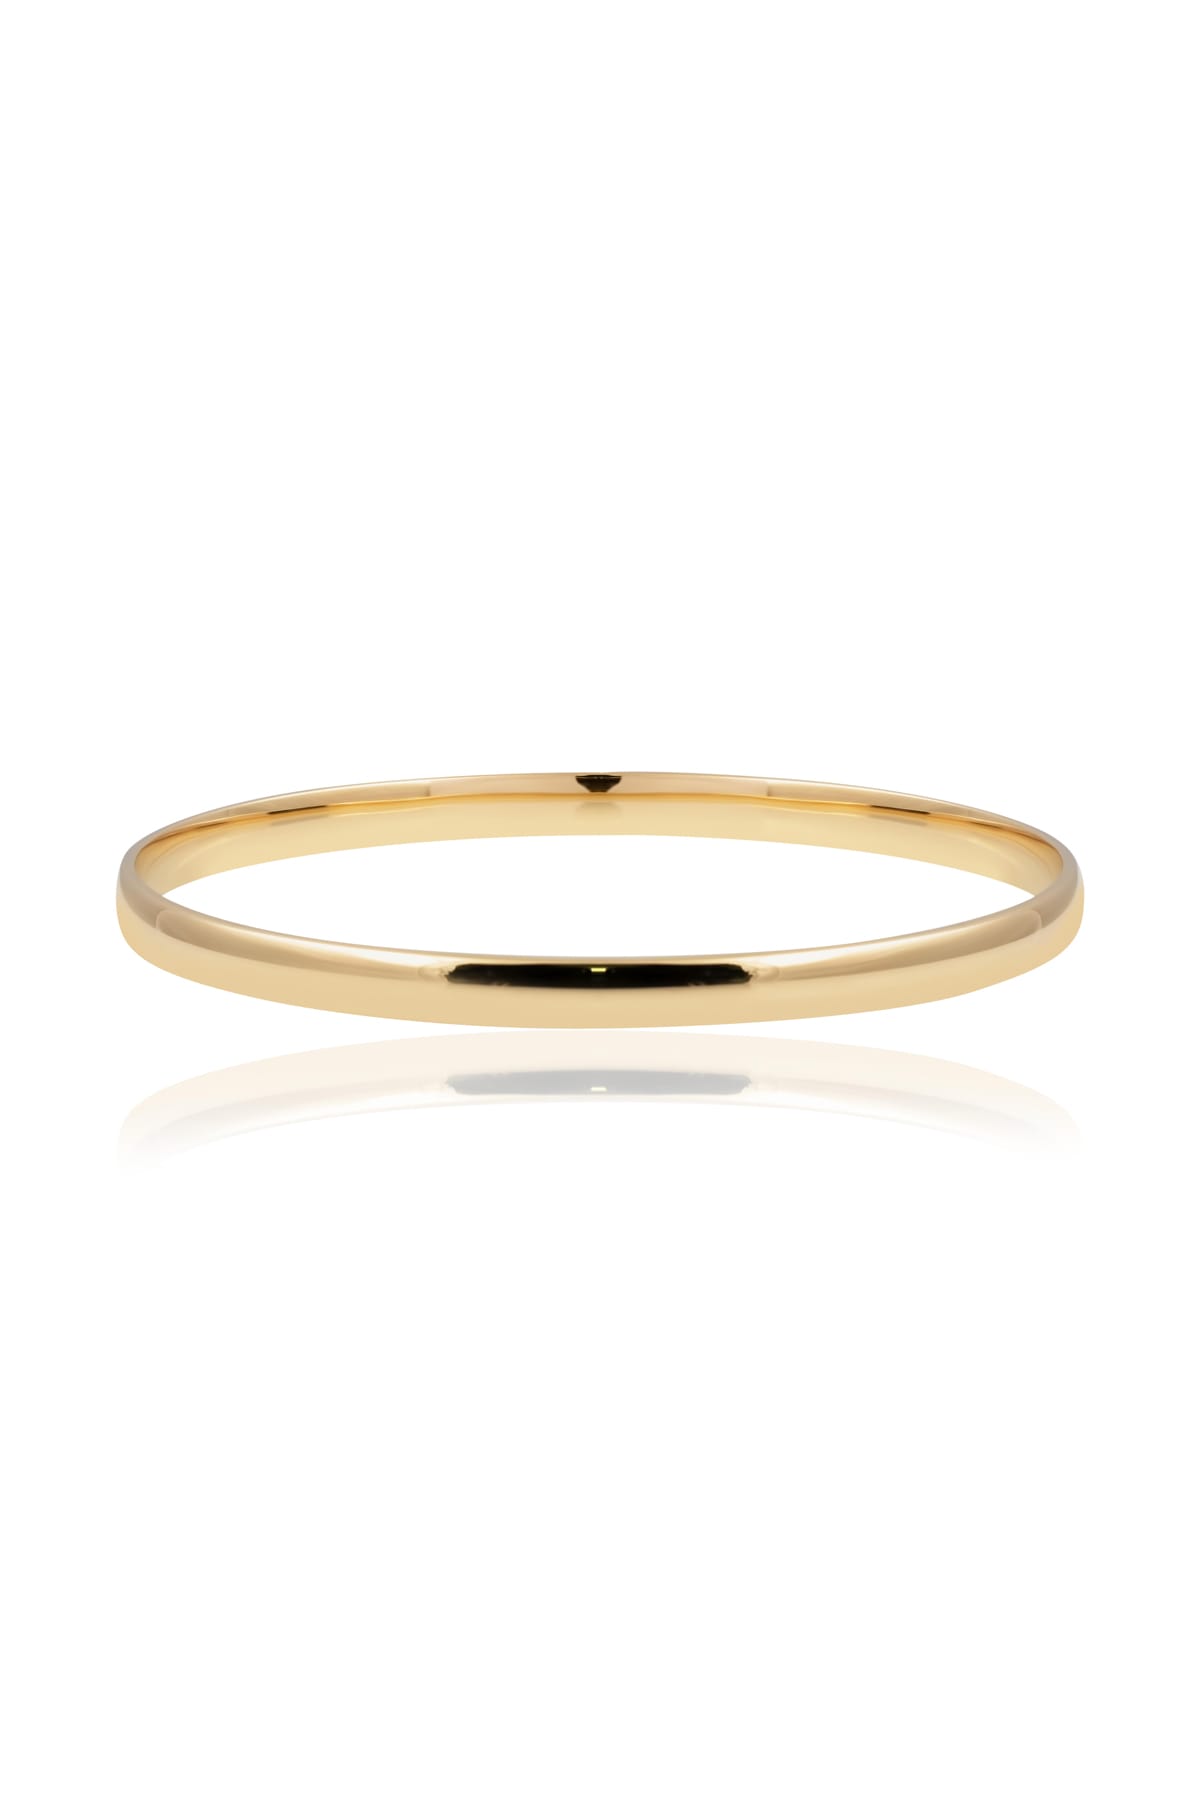 Solid 9 Carat Yellow Gold 5mm Wide Bangle available at LeGassick Diamonds and Jewellery Gold Coast, Australia.